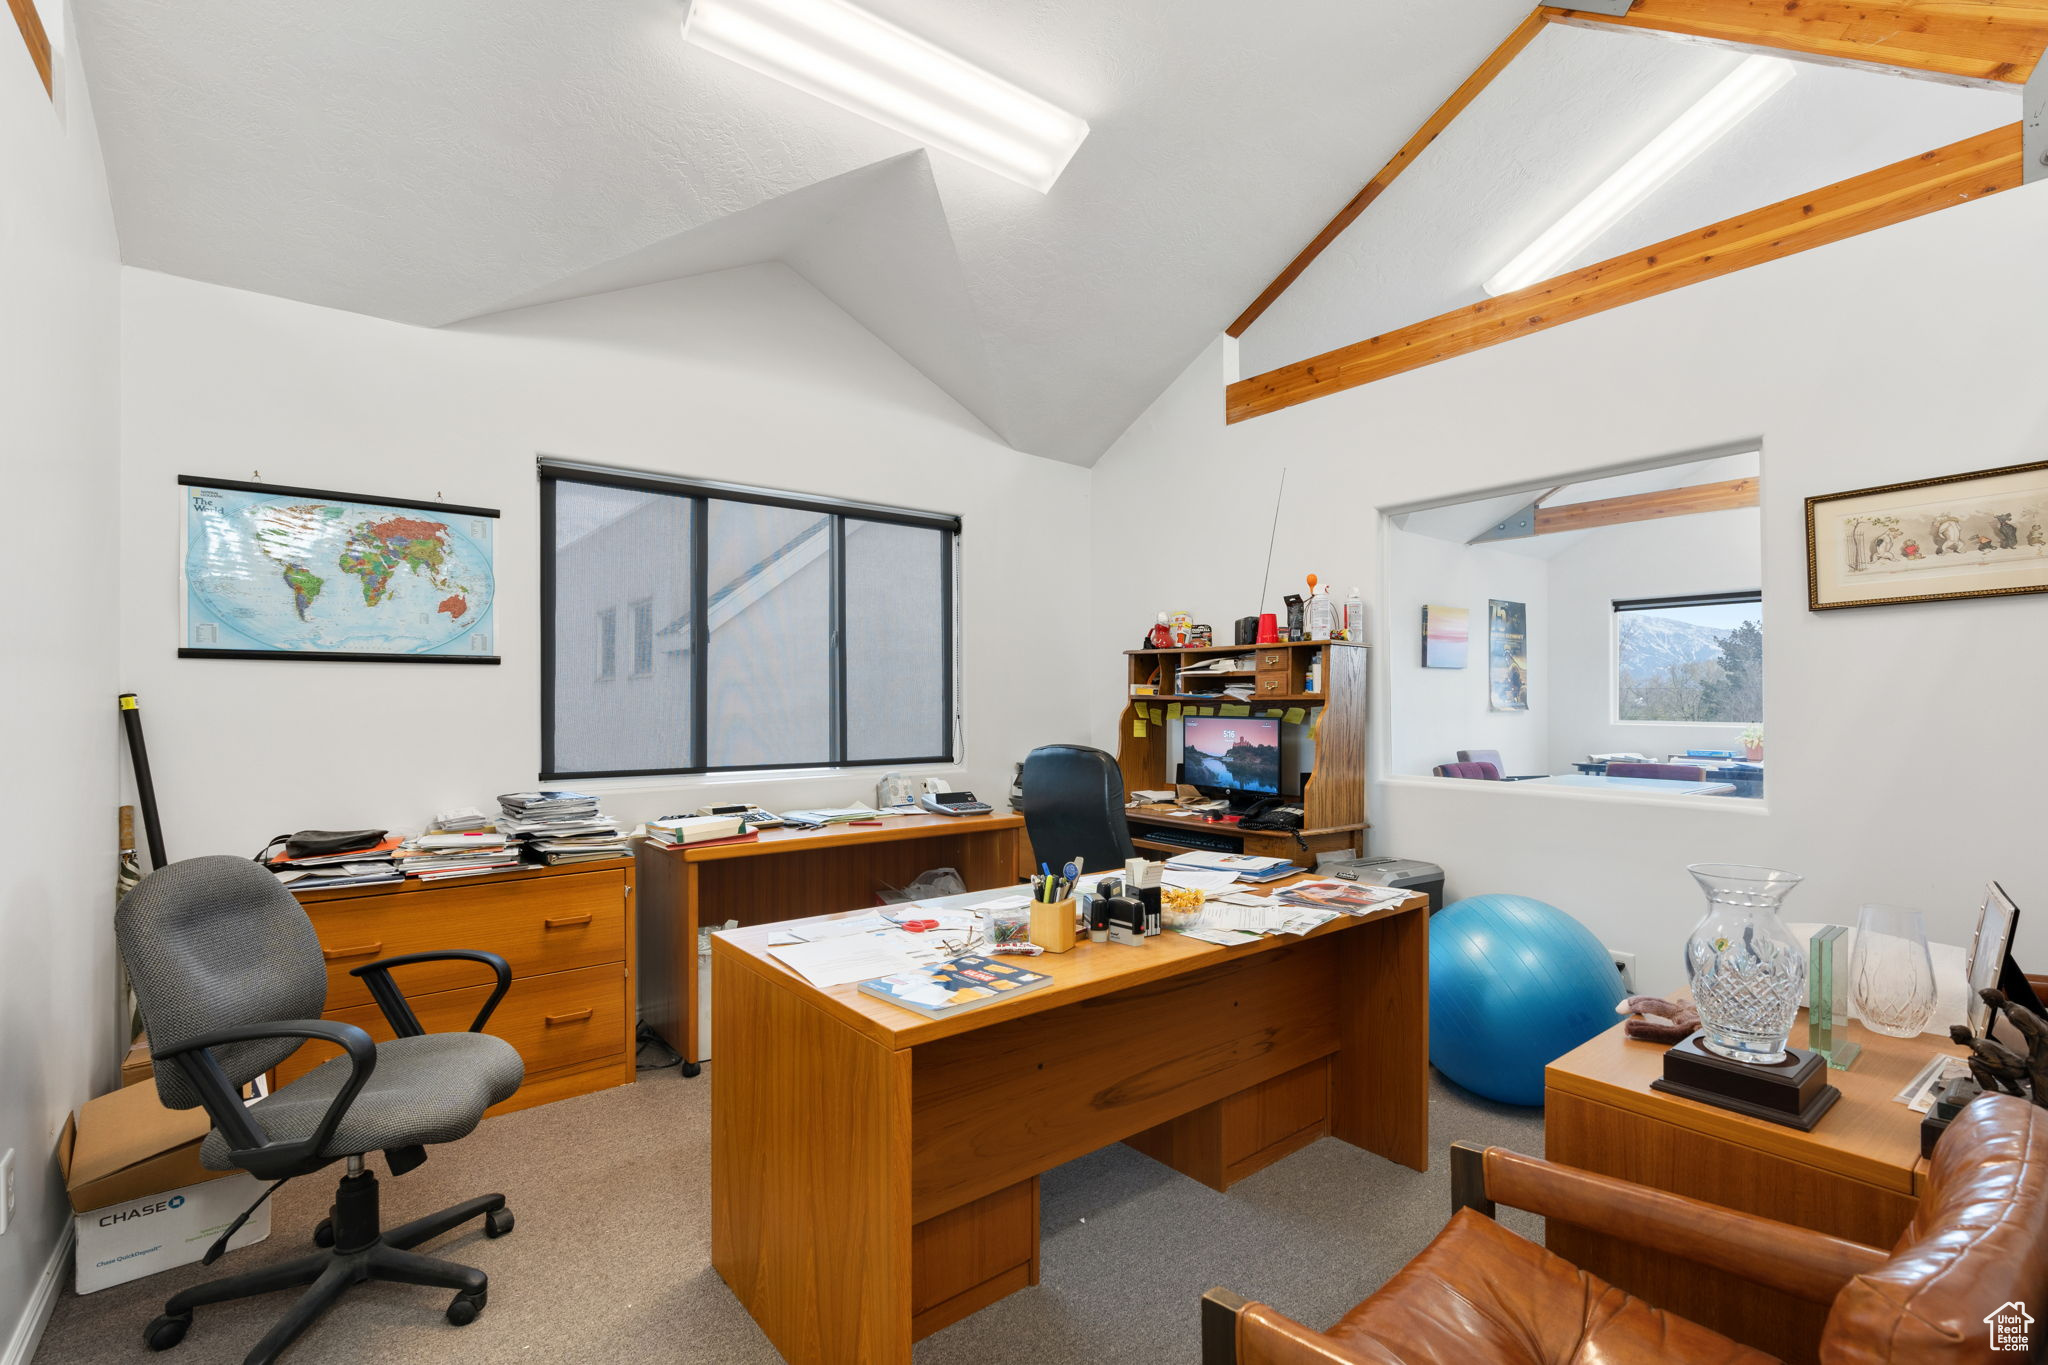 Carpeted office space with lofted ceiling with beams